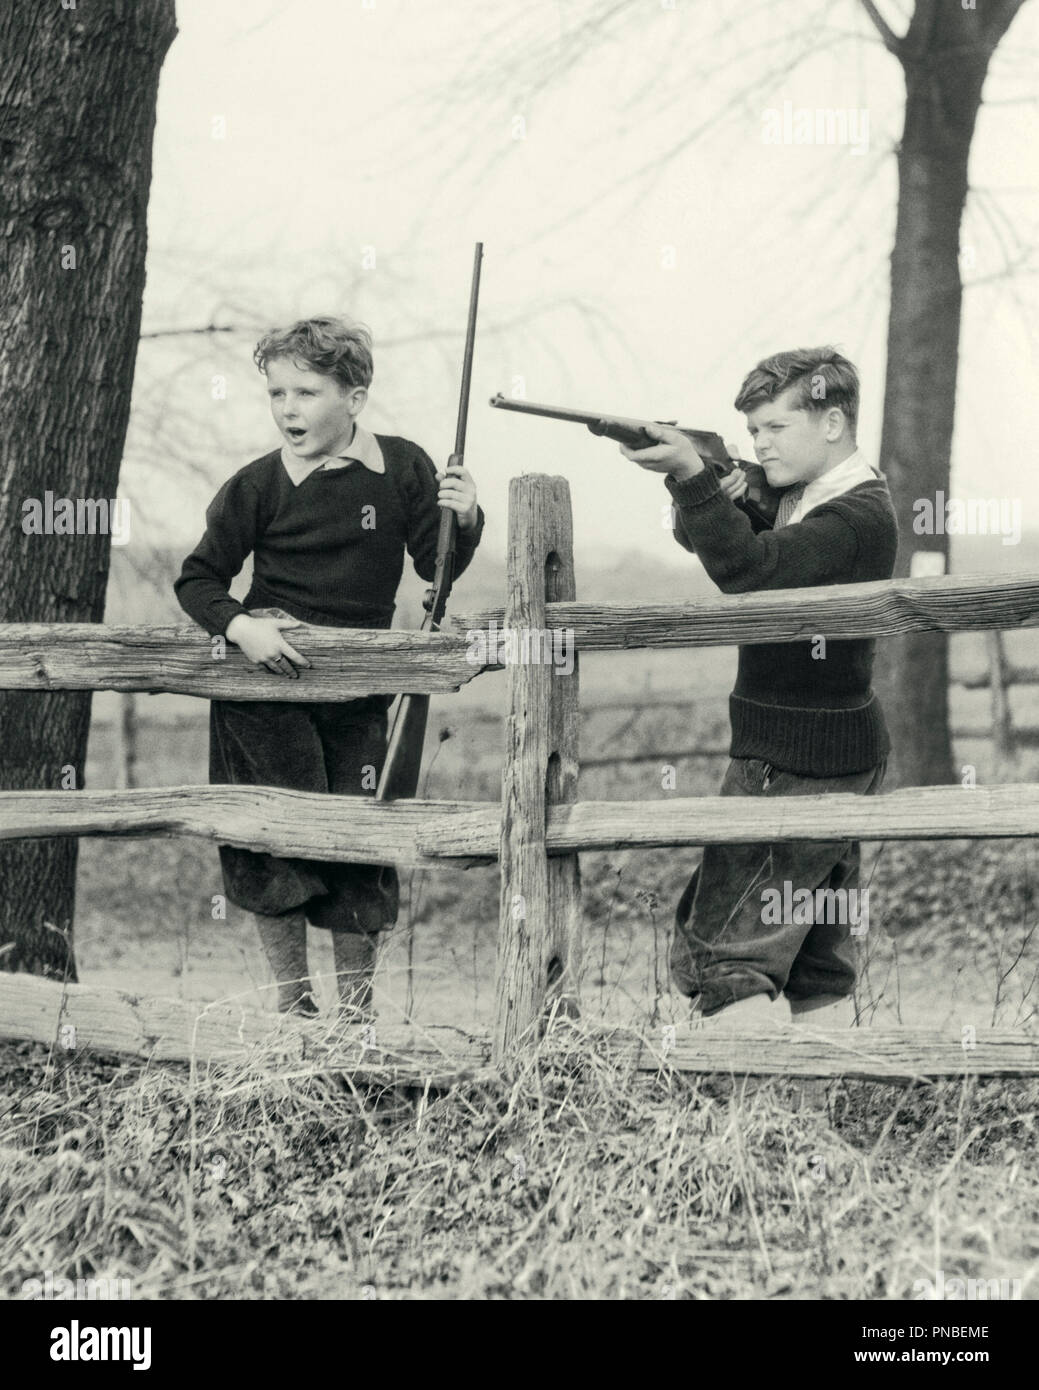 1930s TWO PRETEEN BOYS IN PLUS FOURS AND AUTUMN SWEATERS BEHIND SPLIT RAIL FENCE SAFELY PLINKING SHOOTING 22 CALIBER RIFLES  - a3260 HAR001 HARS CONFIDENCE B&W FREEDOM HAPPINESS ADVENTURE TROUSERS AND ENJOYING KNOWLEDGE RECREATION IN PRETEEN SIBLING SWEATERS SPLIT RAIL CONCEPTUAL RESPONSIBLE RIFLES PLUS FOURS AIMING FIREARM FIREARMS GROWTH JUVENILES PRE-TEEN PRE-TEEN BOY TOGETHERNESS 22 CALIBER BLACK AND WHITE BREECHES CAUCASIAN ETHNICITY HAR001 OLD FASHIONED PRACTICING Stock Photo